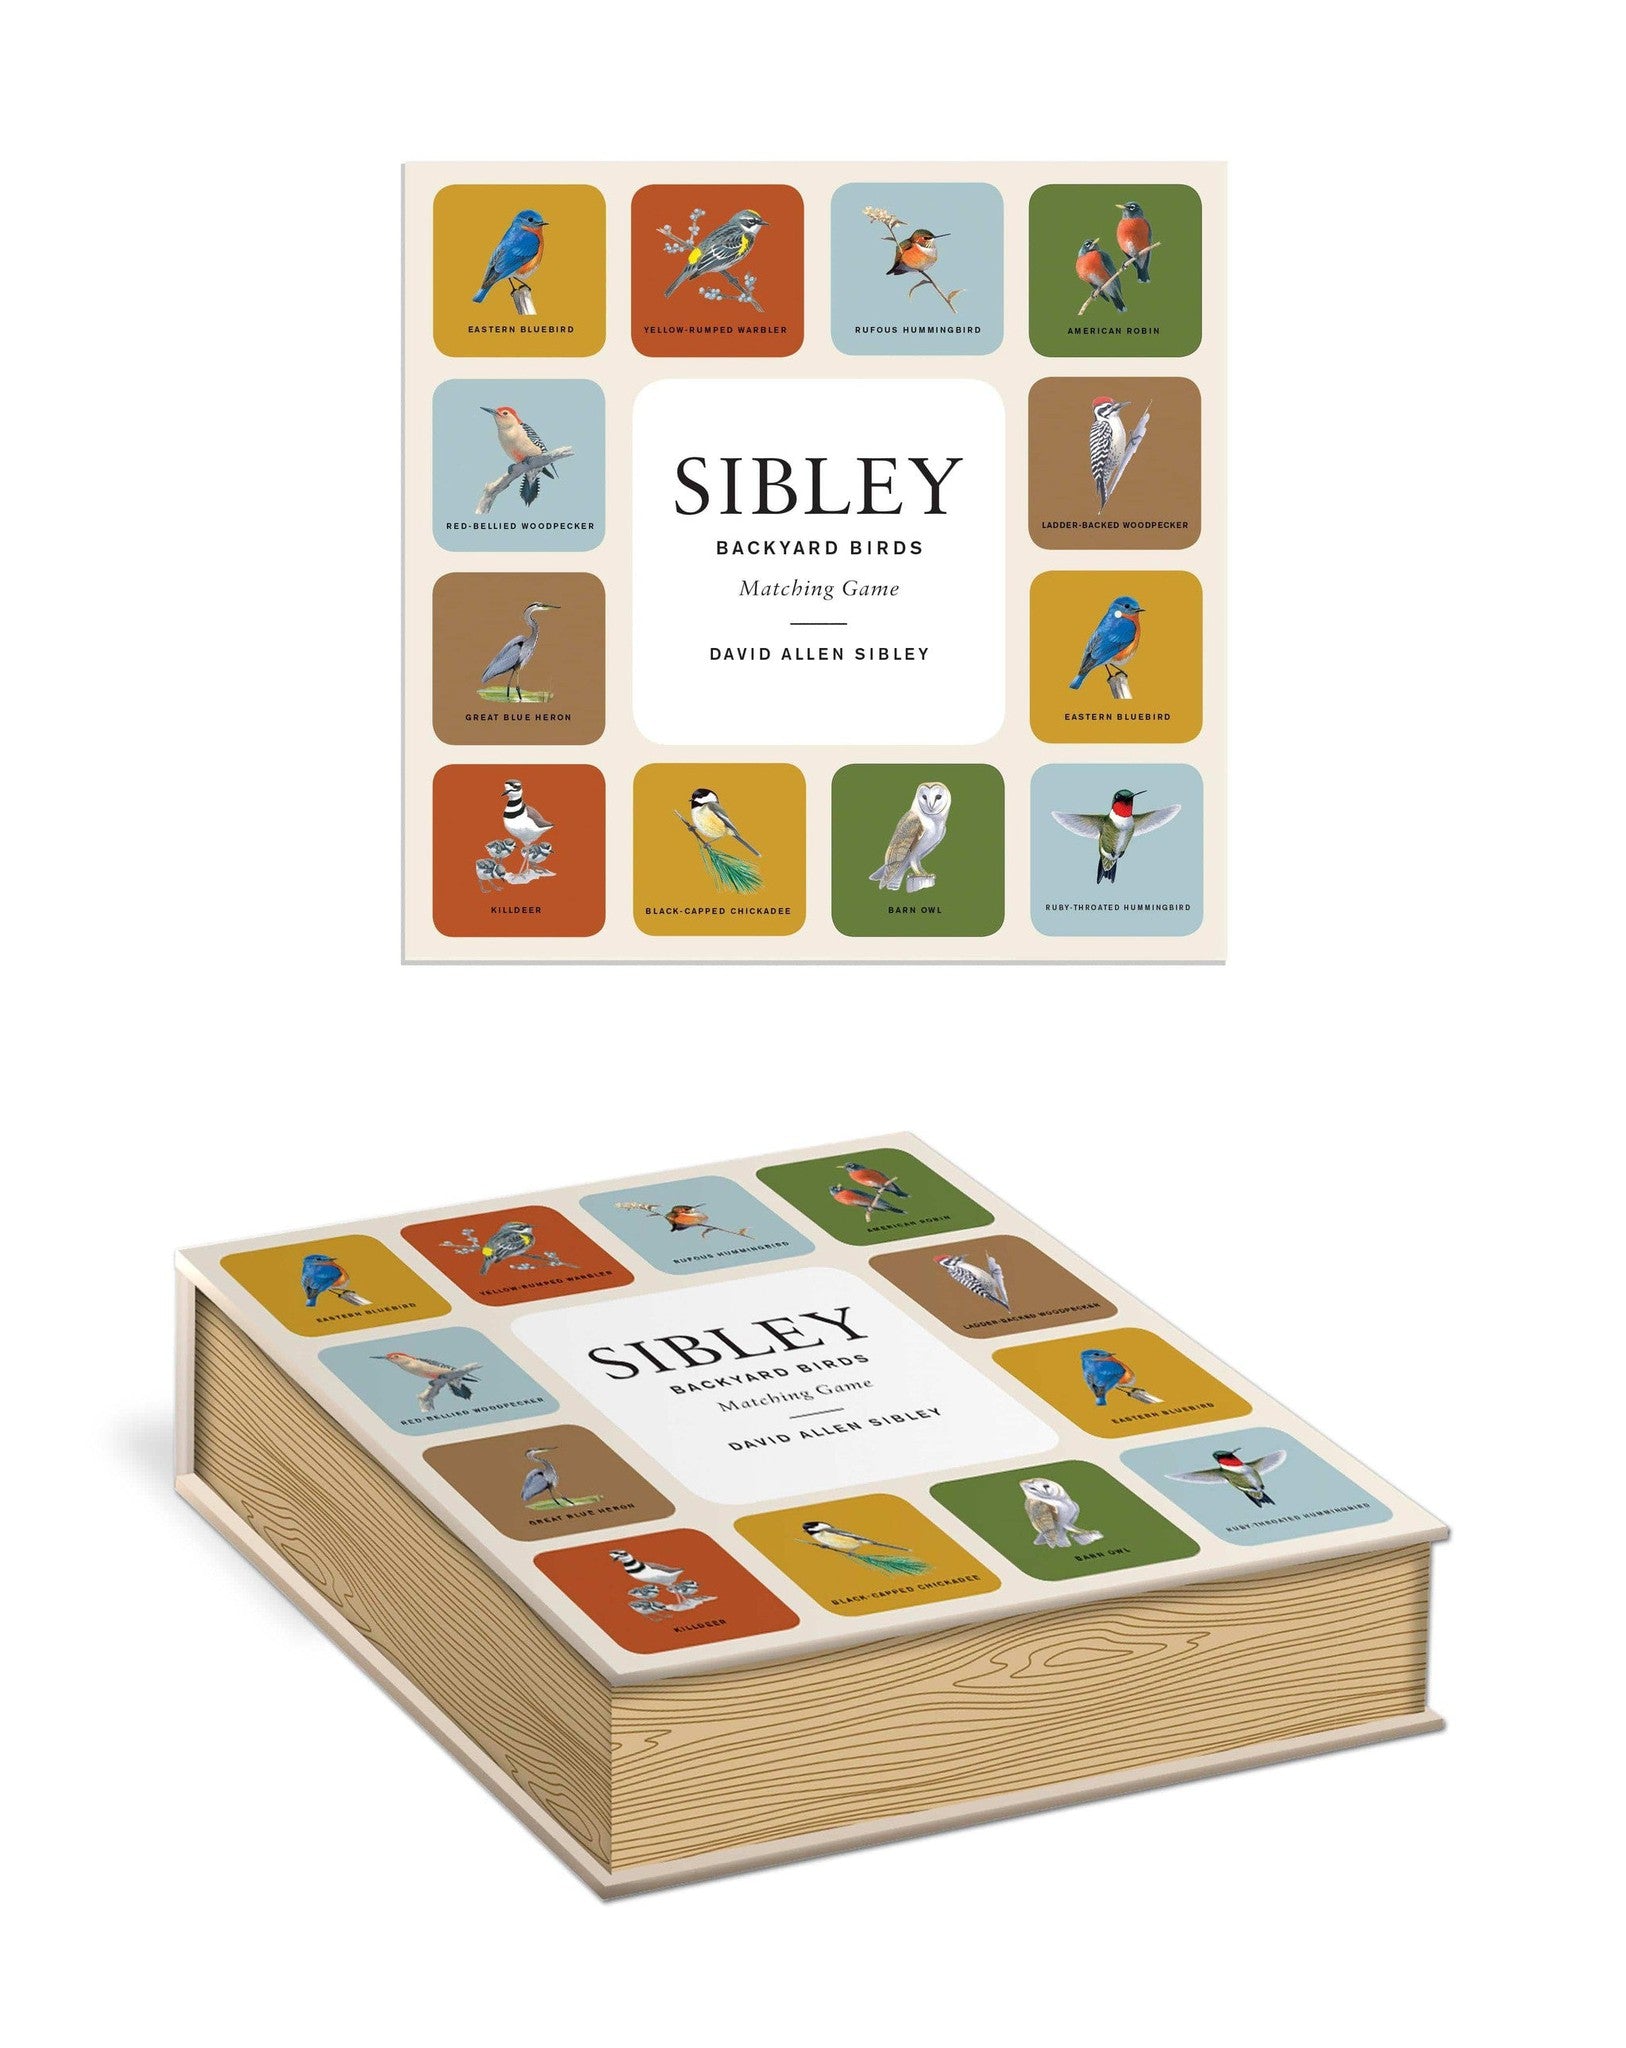 A Sibley Backyard Birds Matching Game with a bird on the cover by Penguin Random House.